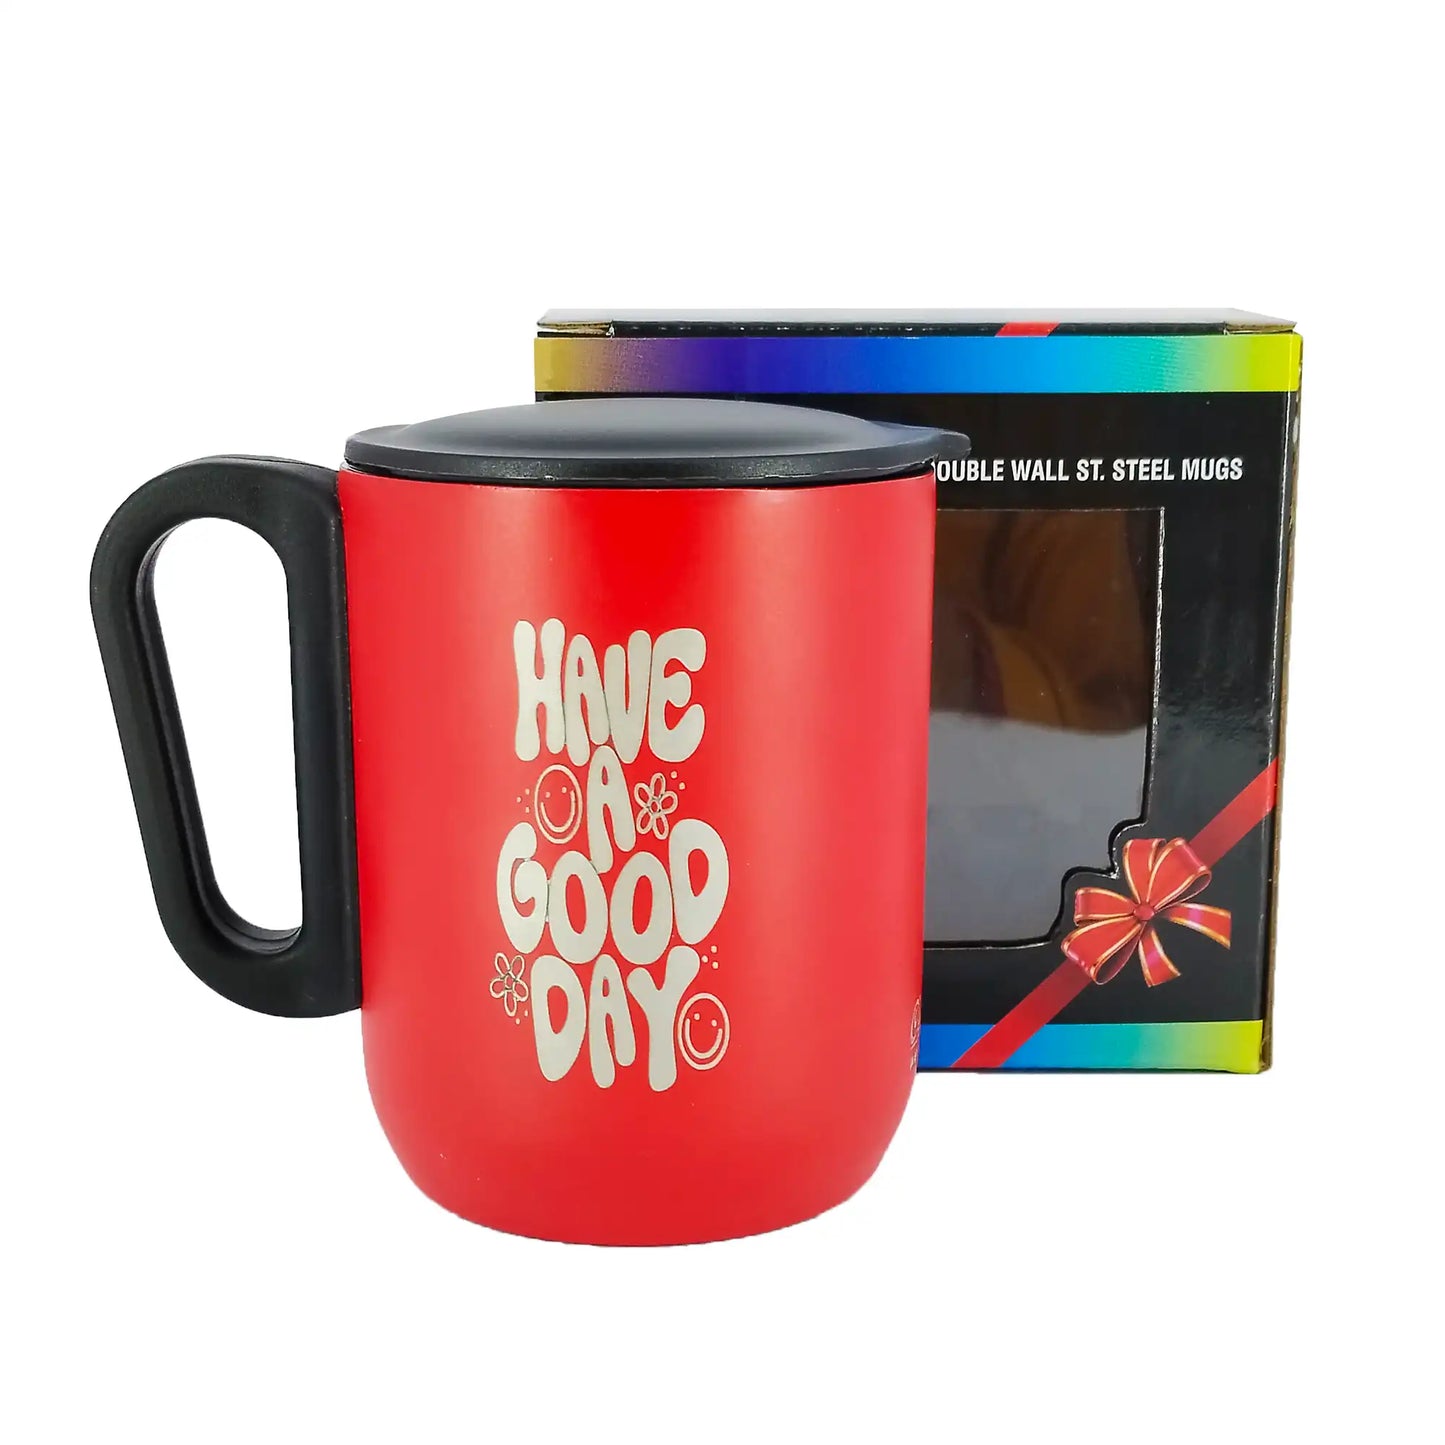 Good Day Stainless Steel Mugs